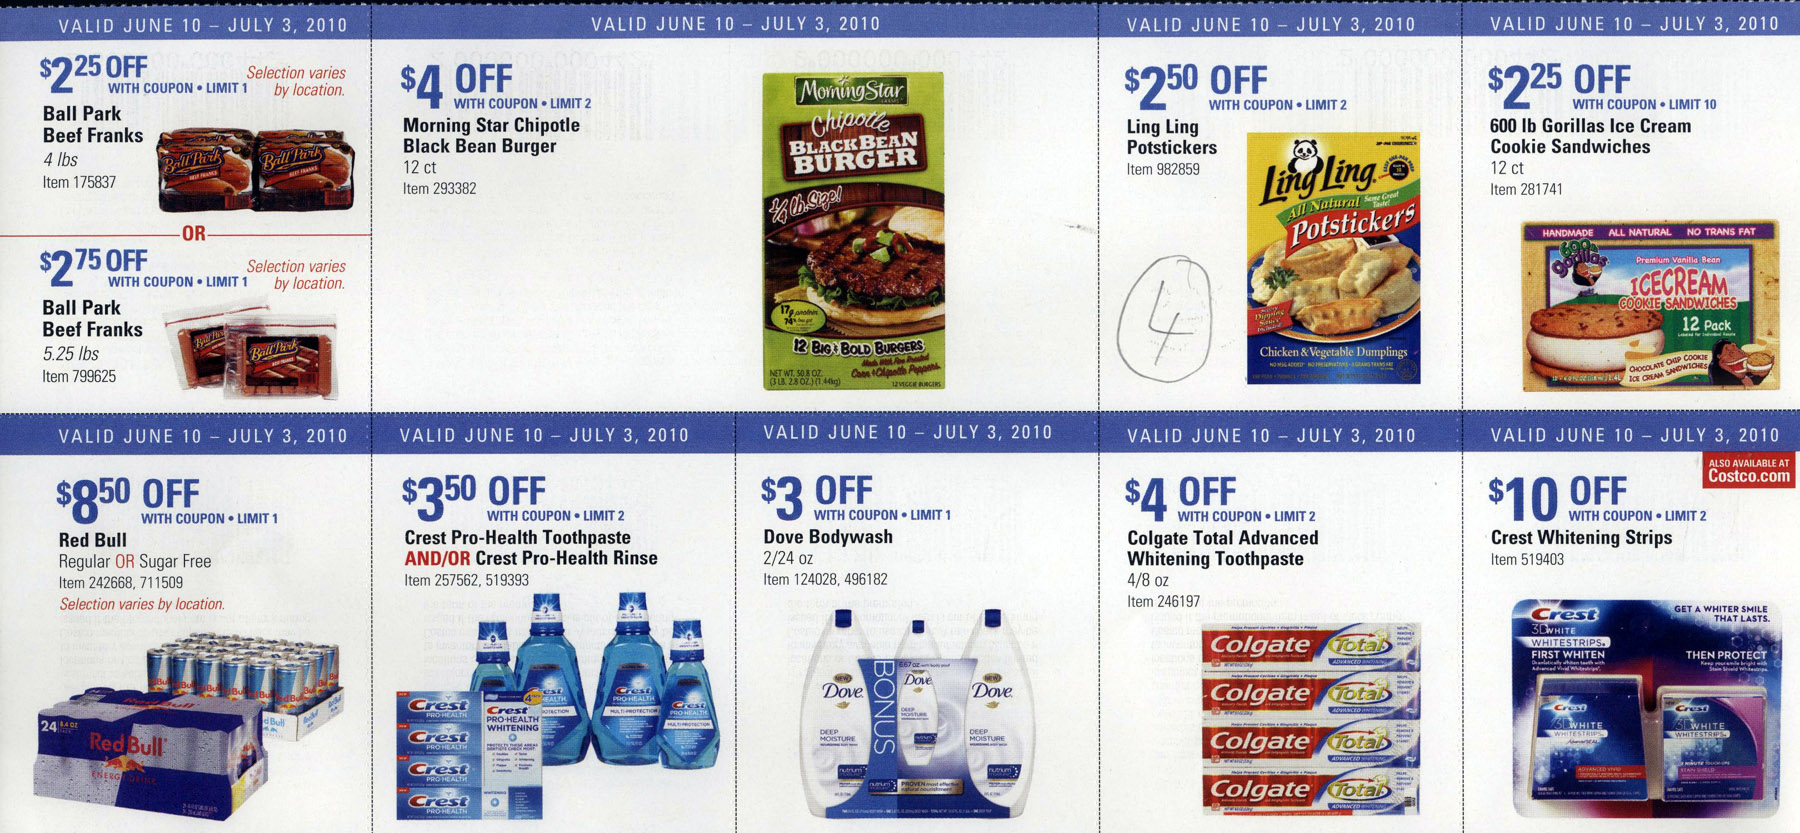 Coupon book full size page ->4<-